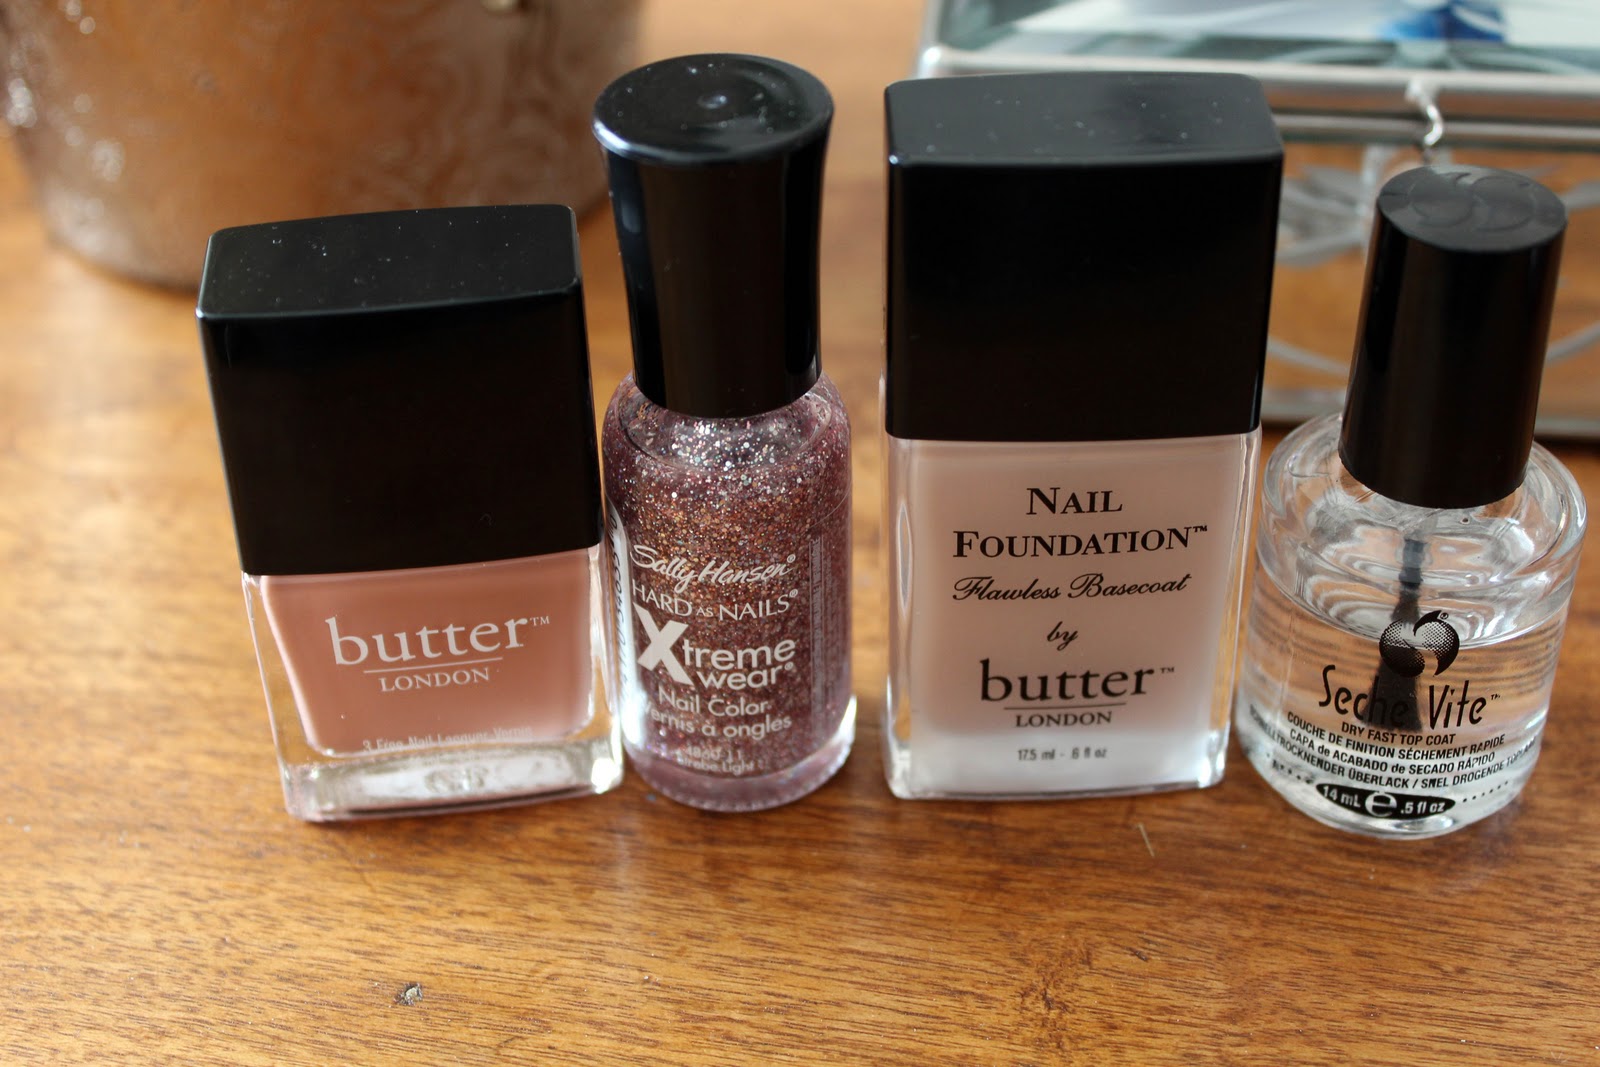 5. "Butter London Tea with the Queen" - wide 3